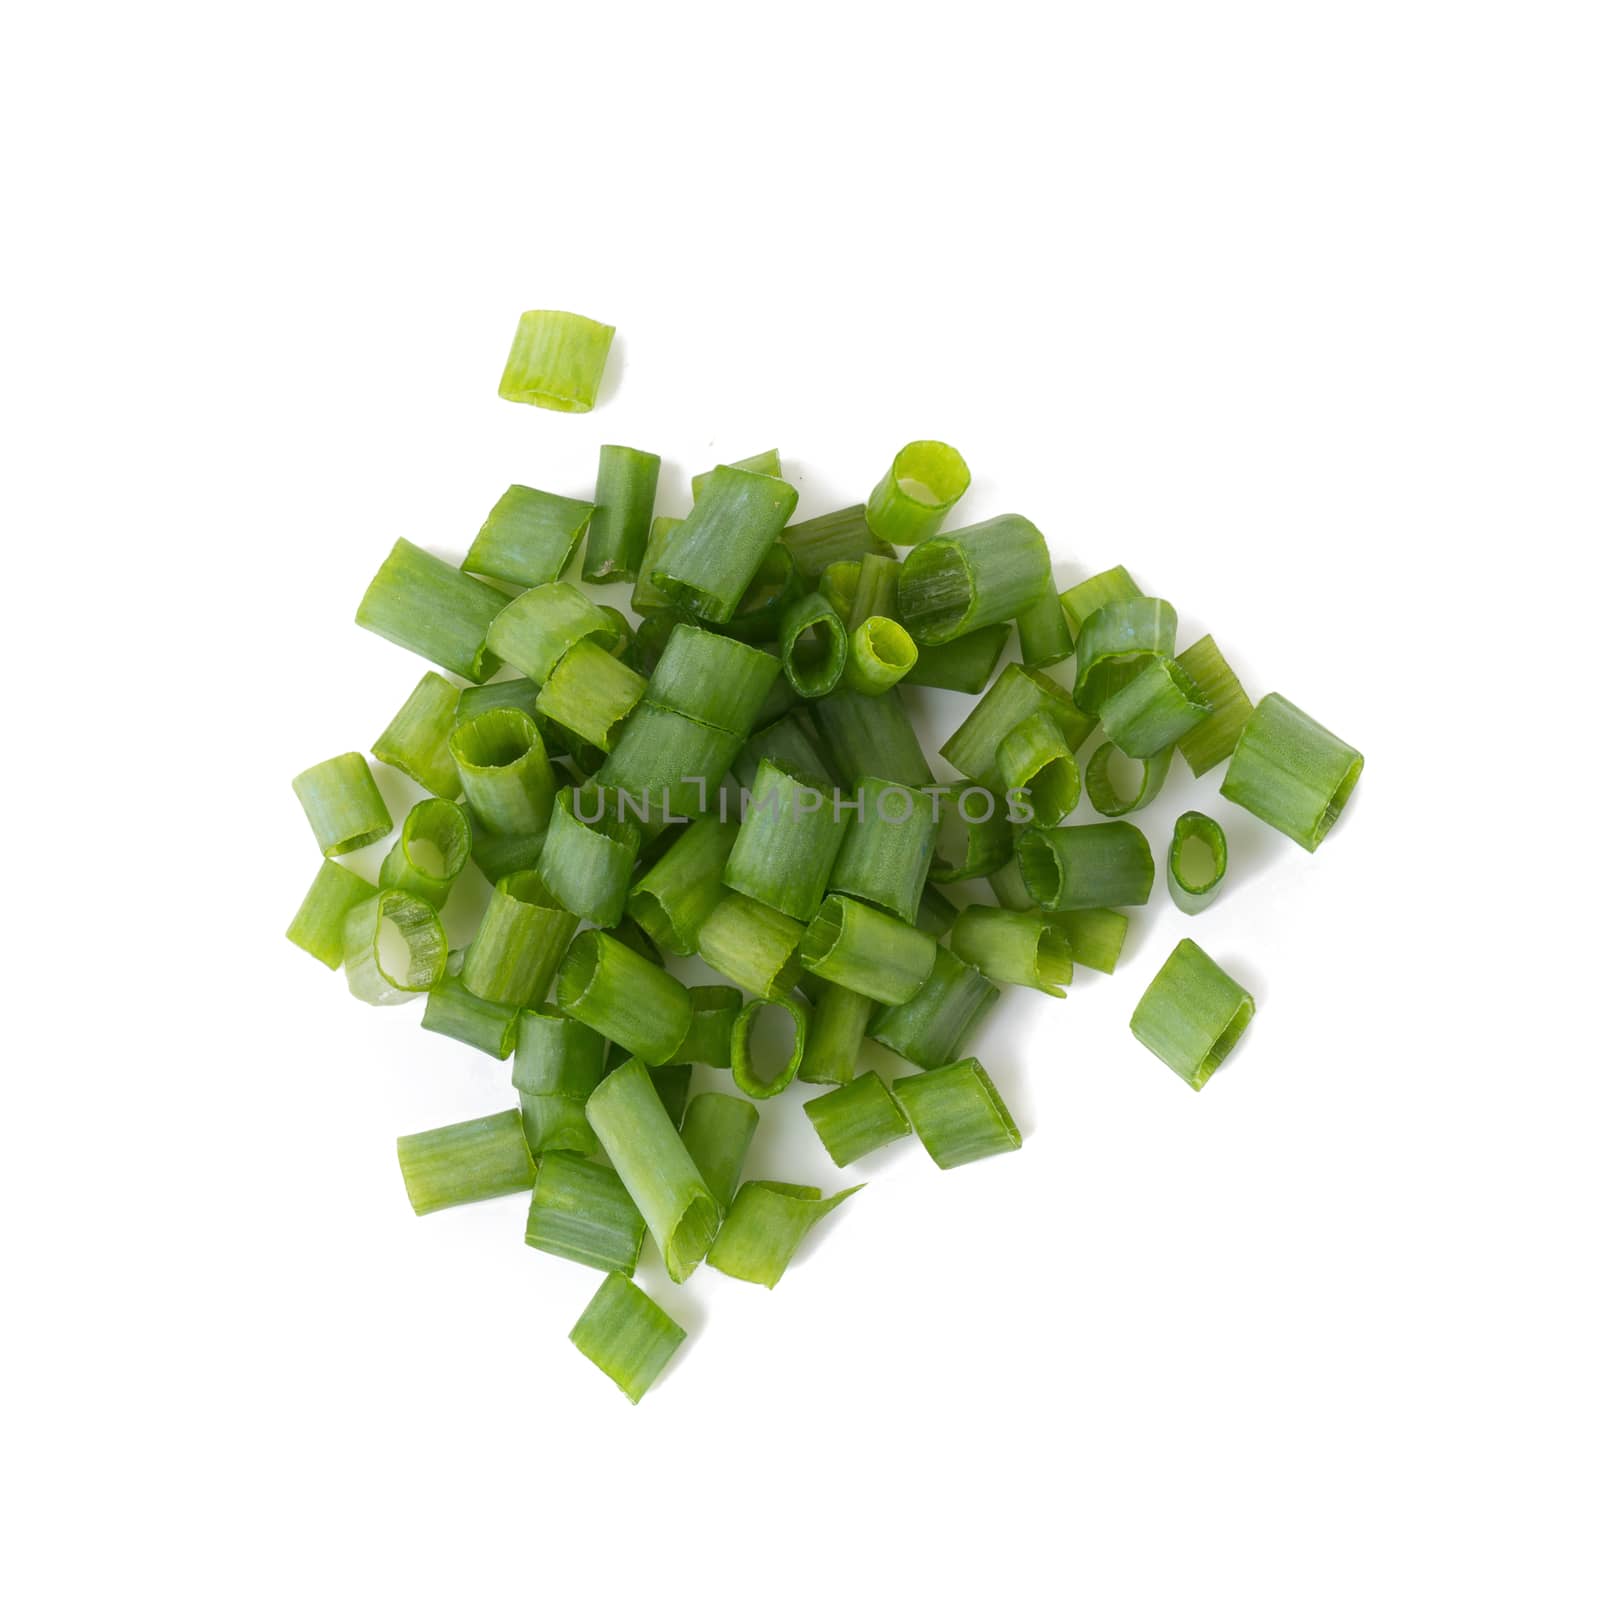 Chopped fresh green onions isolated on white background.